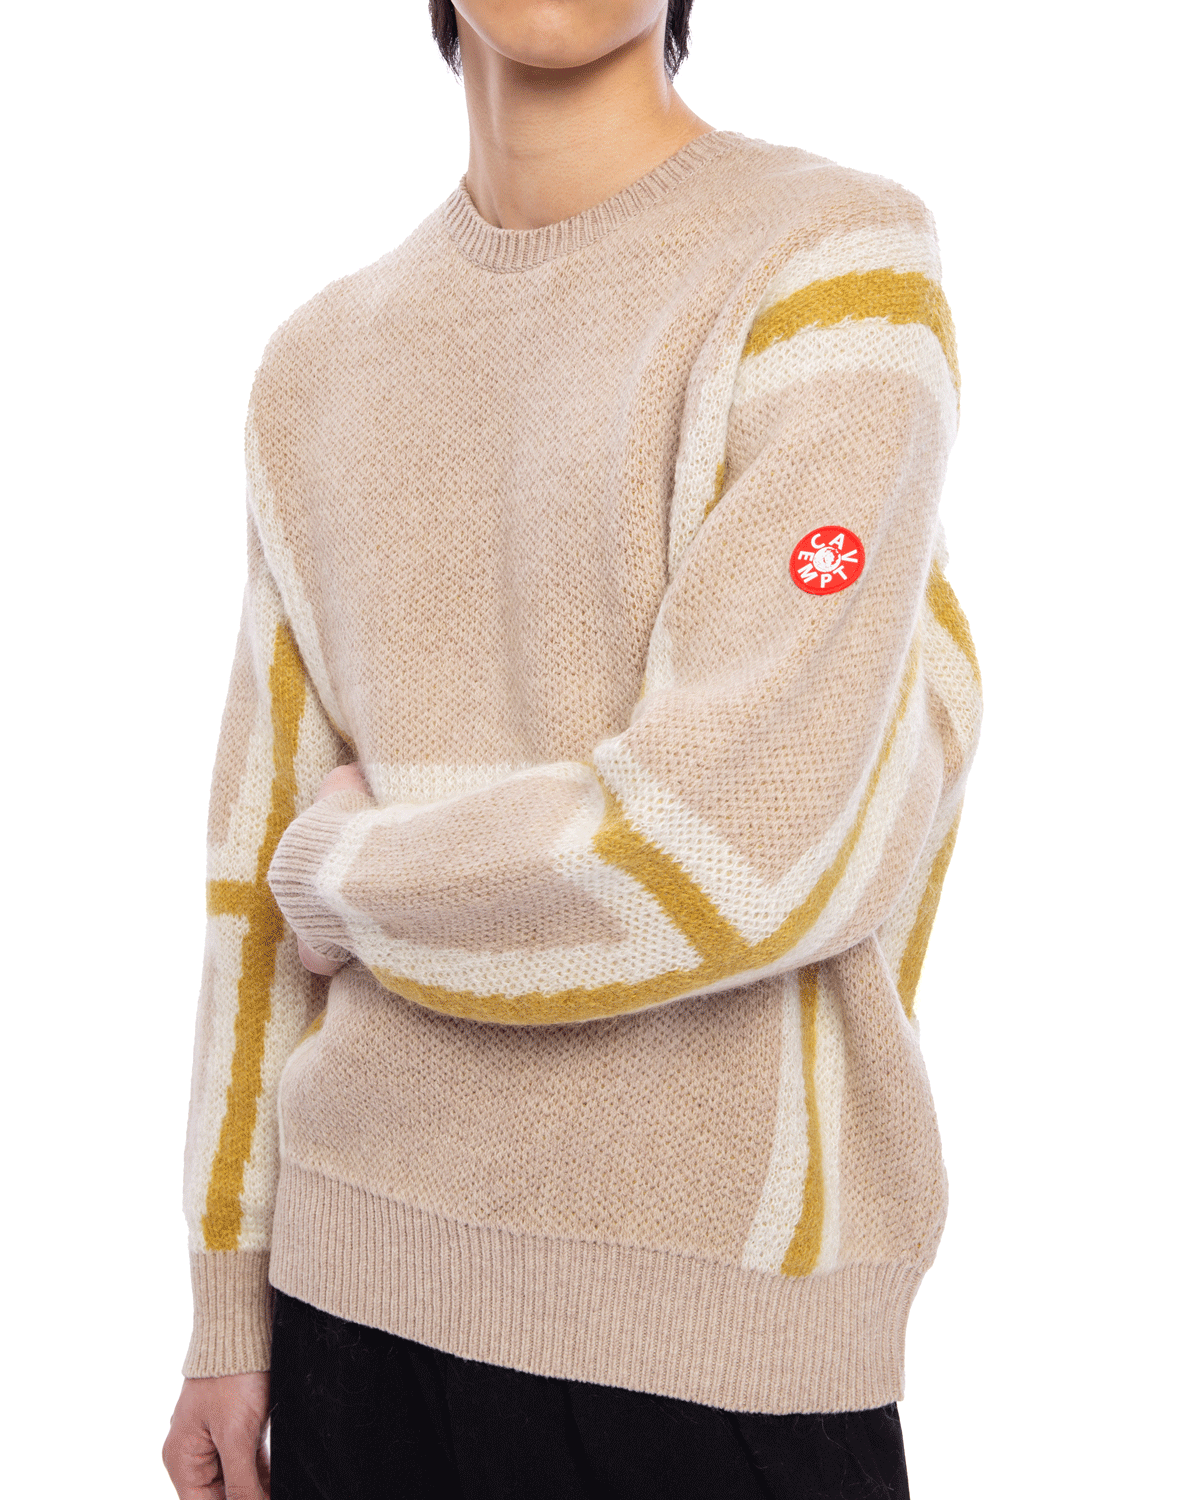 Indefinable Boundary Knit Beige